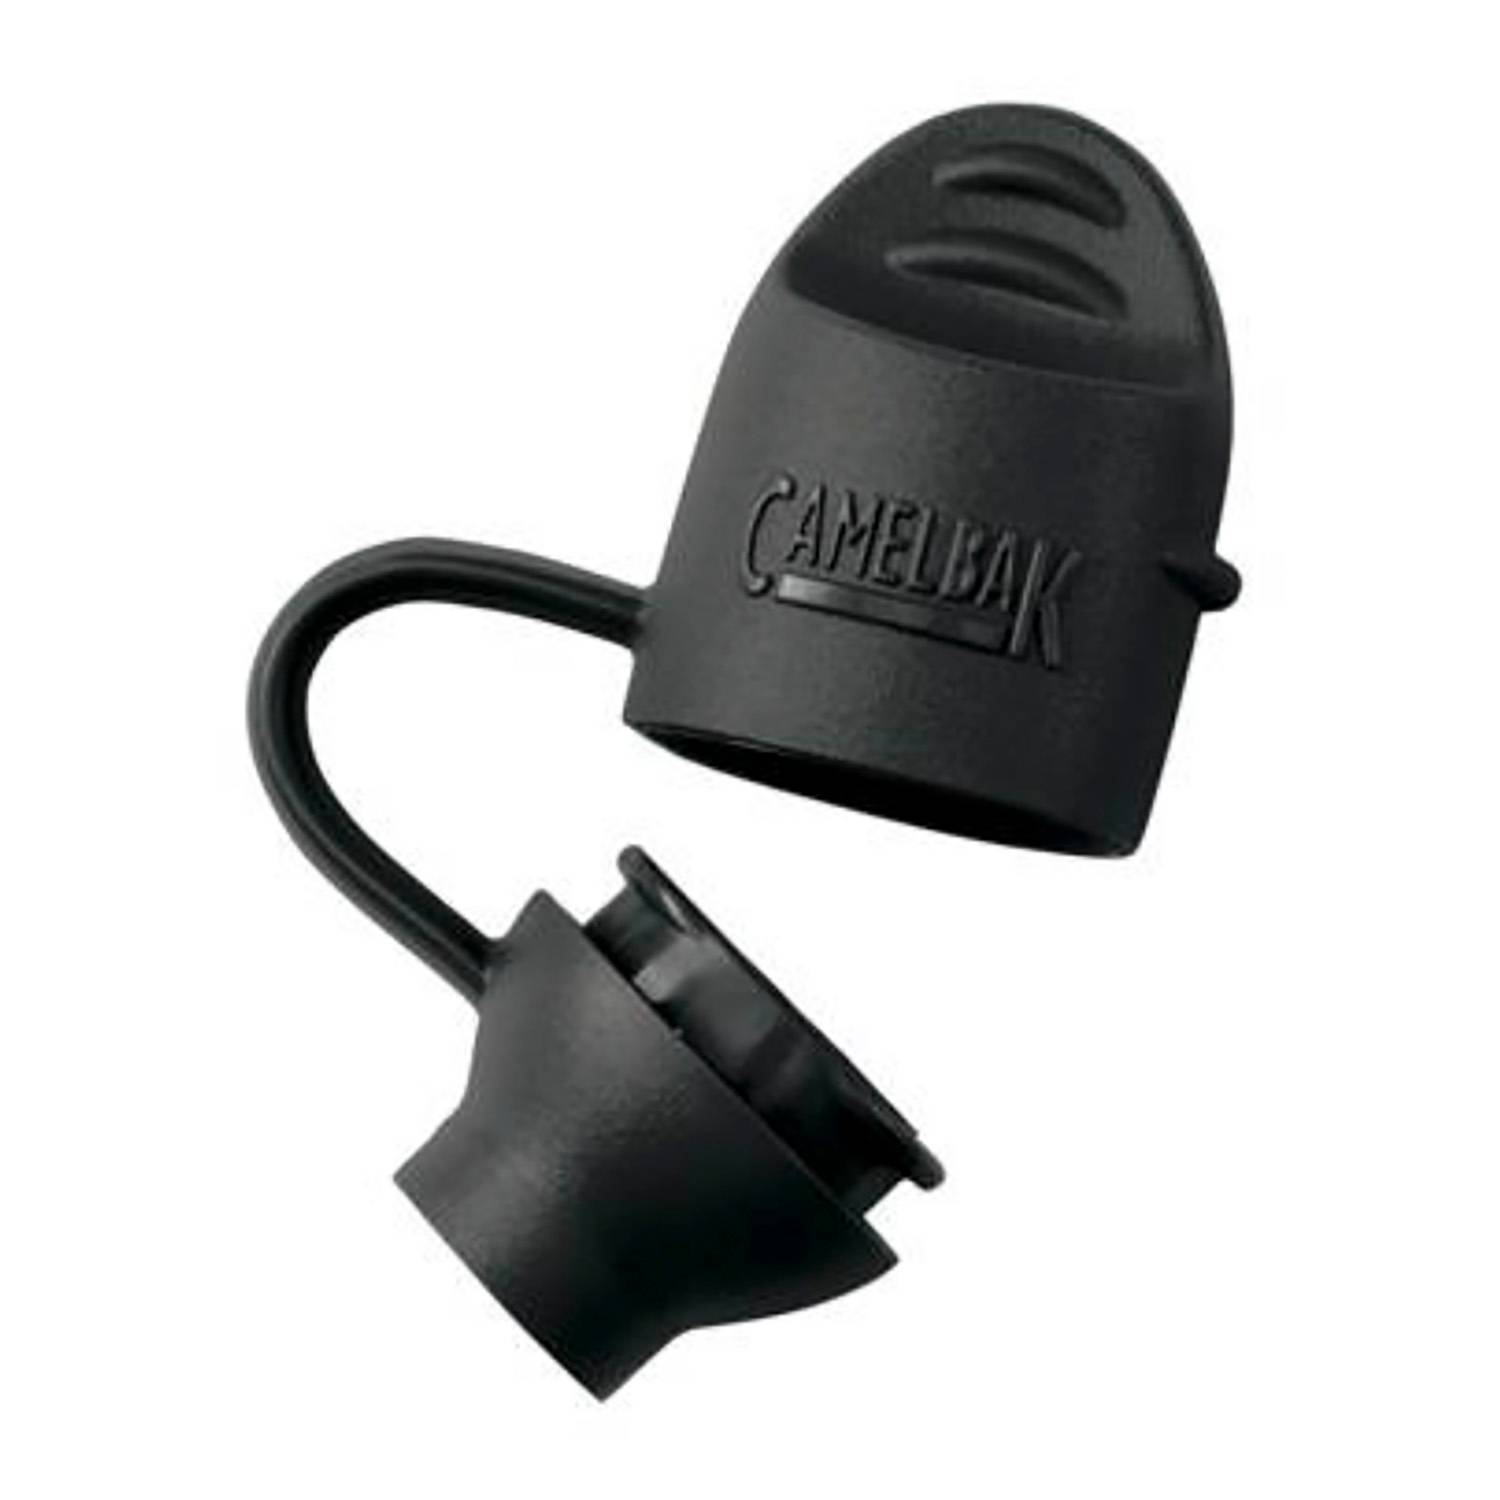 Big Bite Valve with HydroLink Adapter for CamelBak Water Res